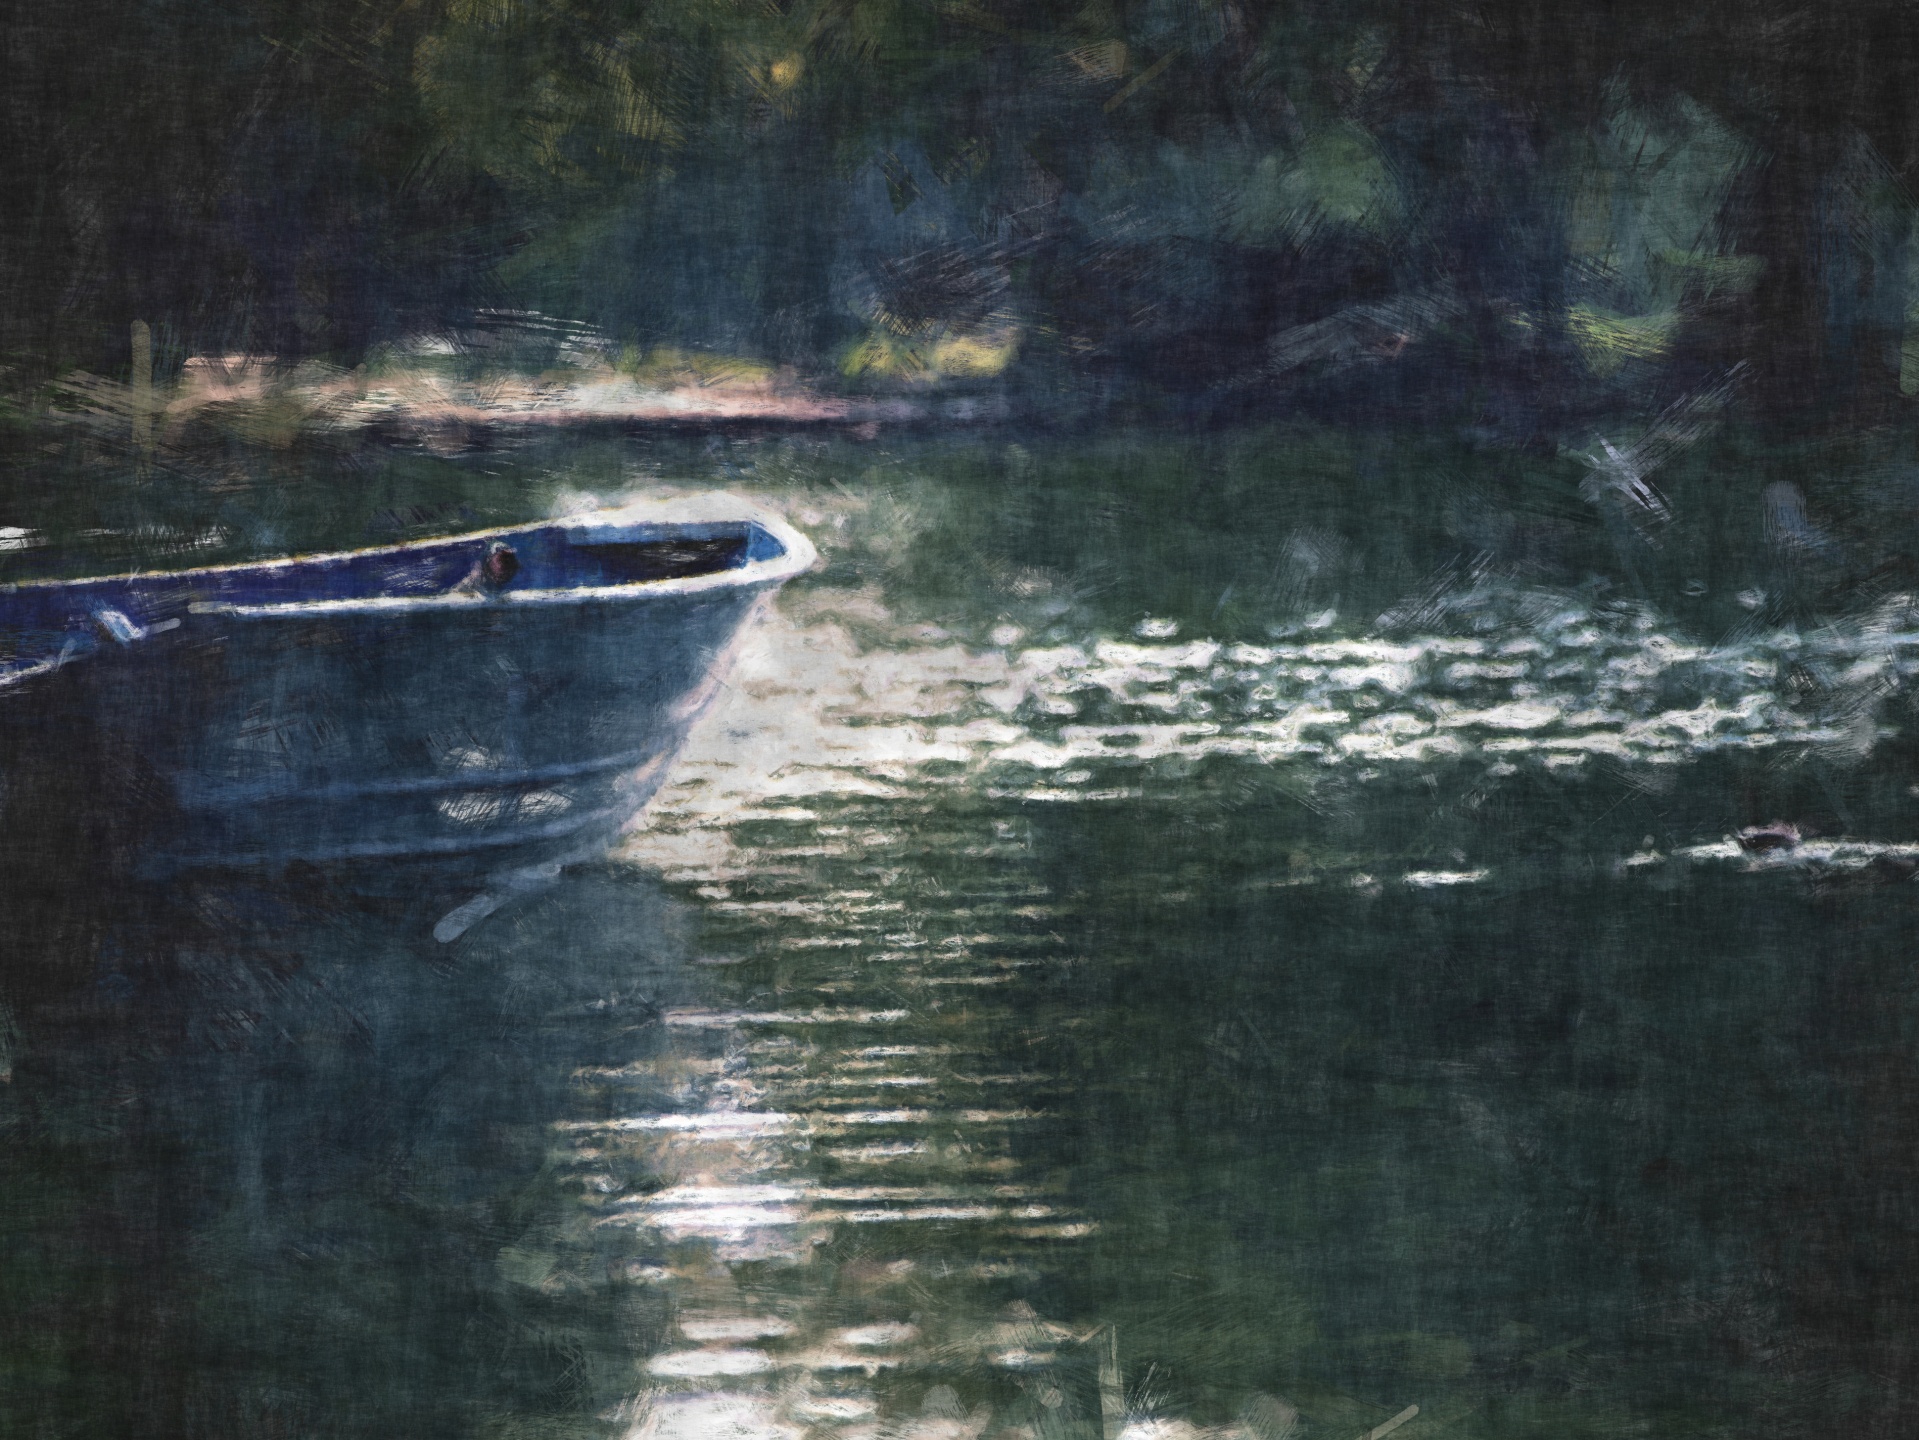 serene painting of a rowboat docked in a lake